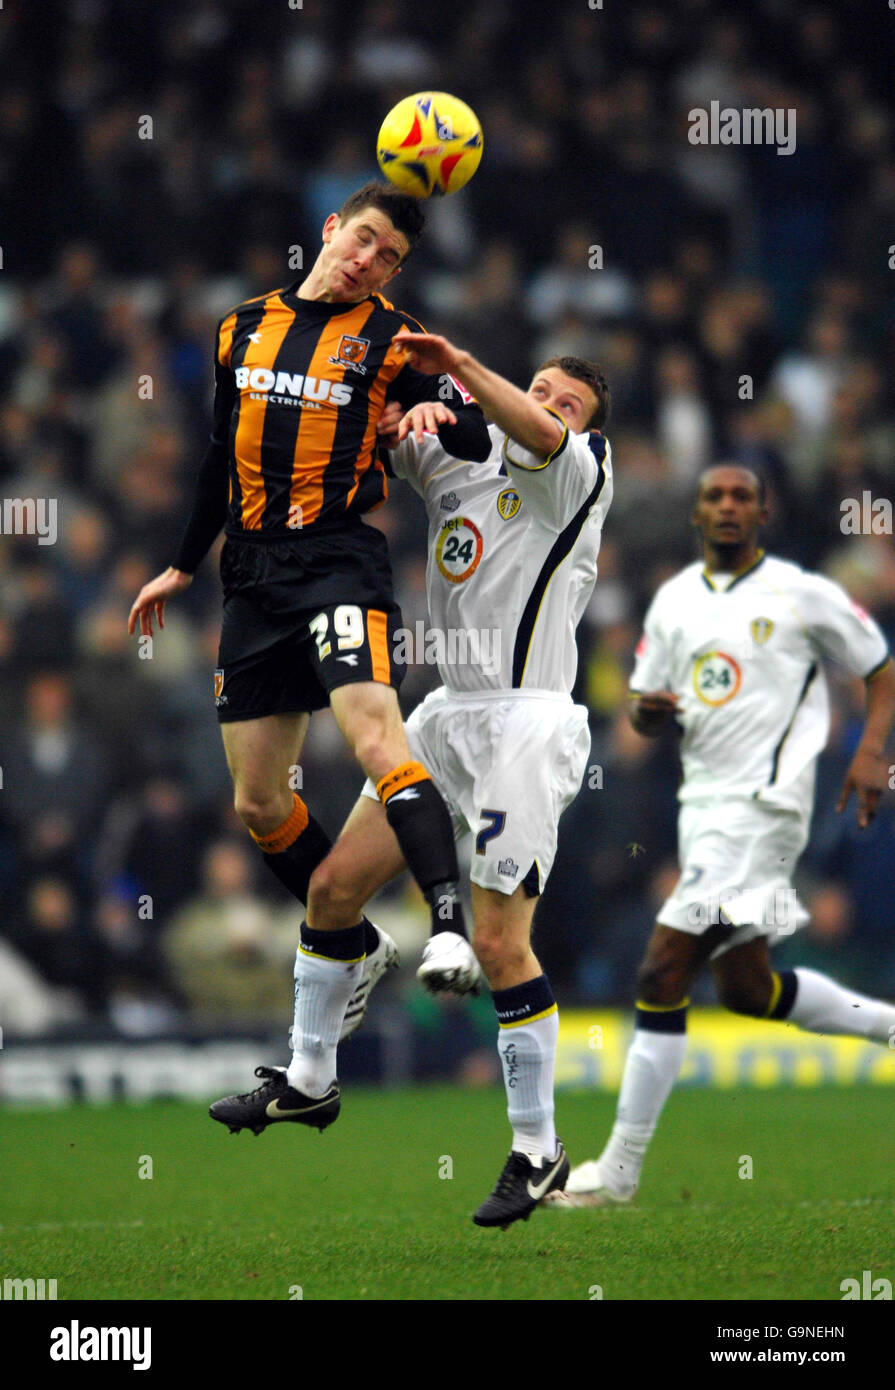 Leed's Ian Westlake (right) challenges Hull's Ryan France during the Coca-Cola Championship match at Elland Road, Leeds. Stock Photo